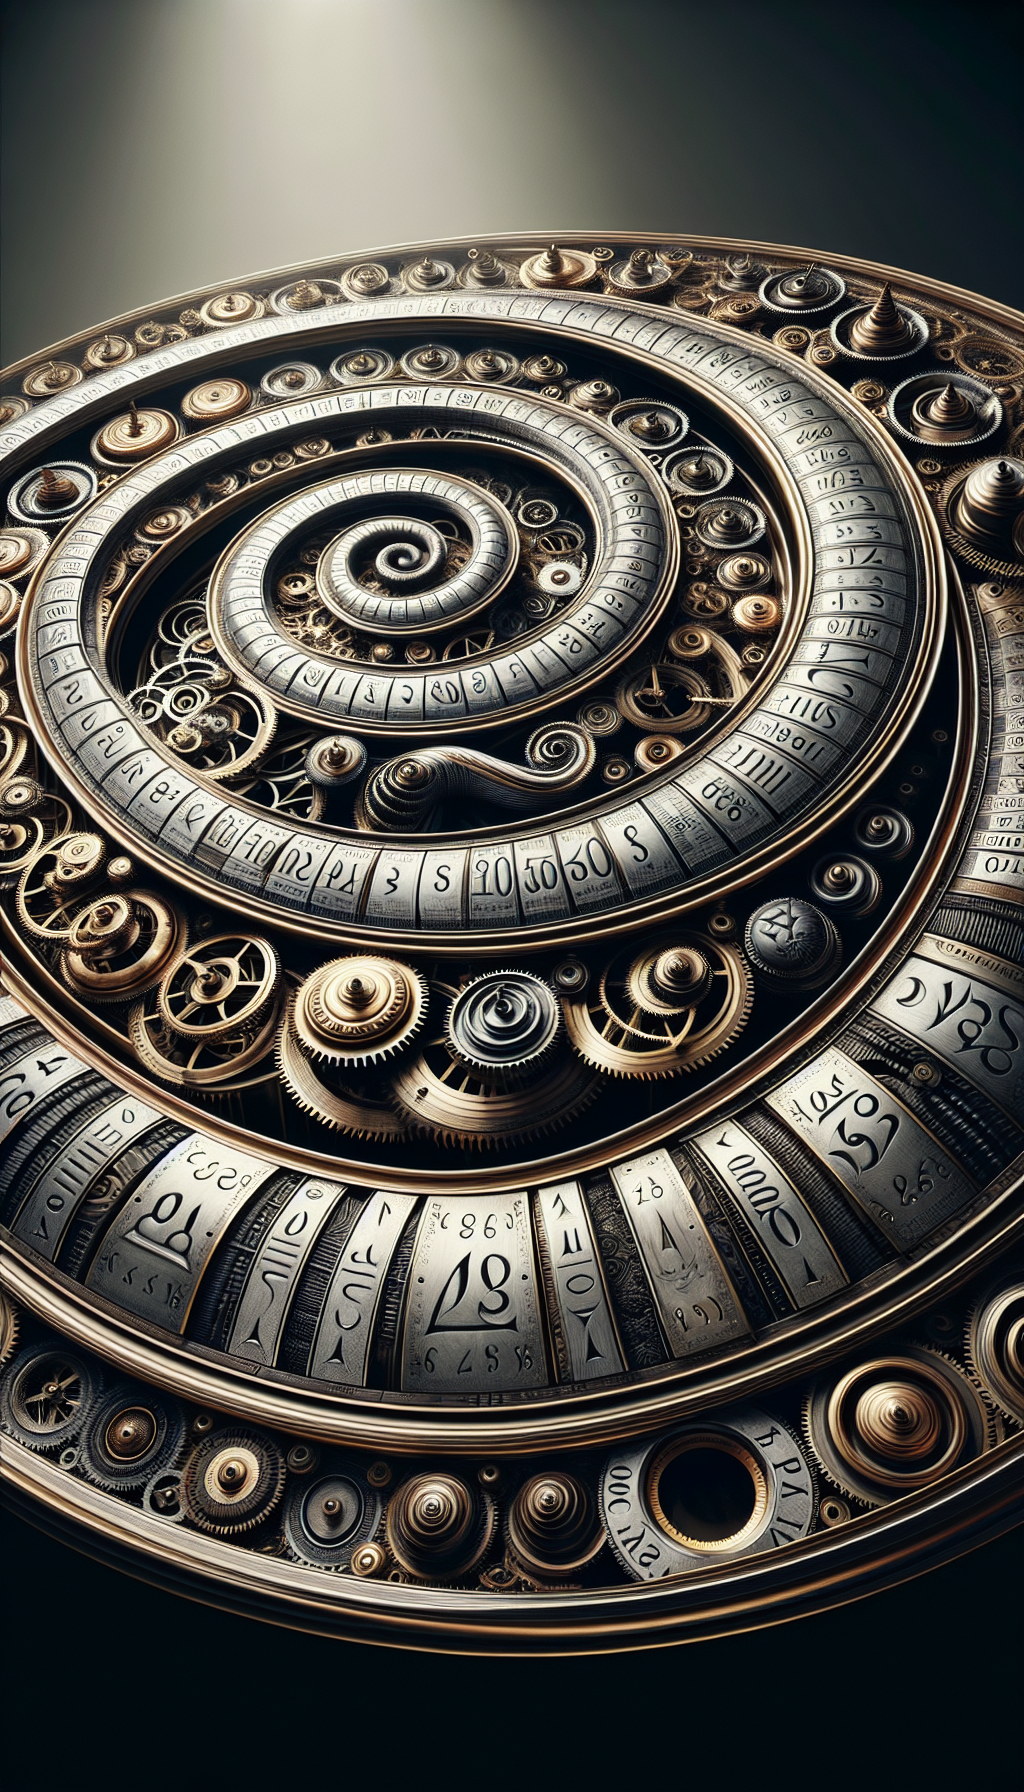 An intricately detailed antique clock unravels its gears to form a timeline. Along its spiral, iconic clockmakers' marks are etched, leading viewers on a visual journey through history. Each mark is styled distinctively to indicate its era and origin, symbolizing the rich tapestry of antique clock craftsmanship and the enduring legacy of their creators' unique identifiers.